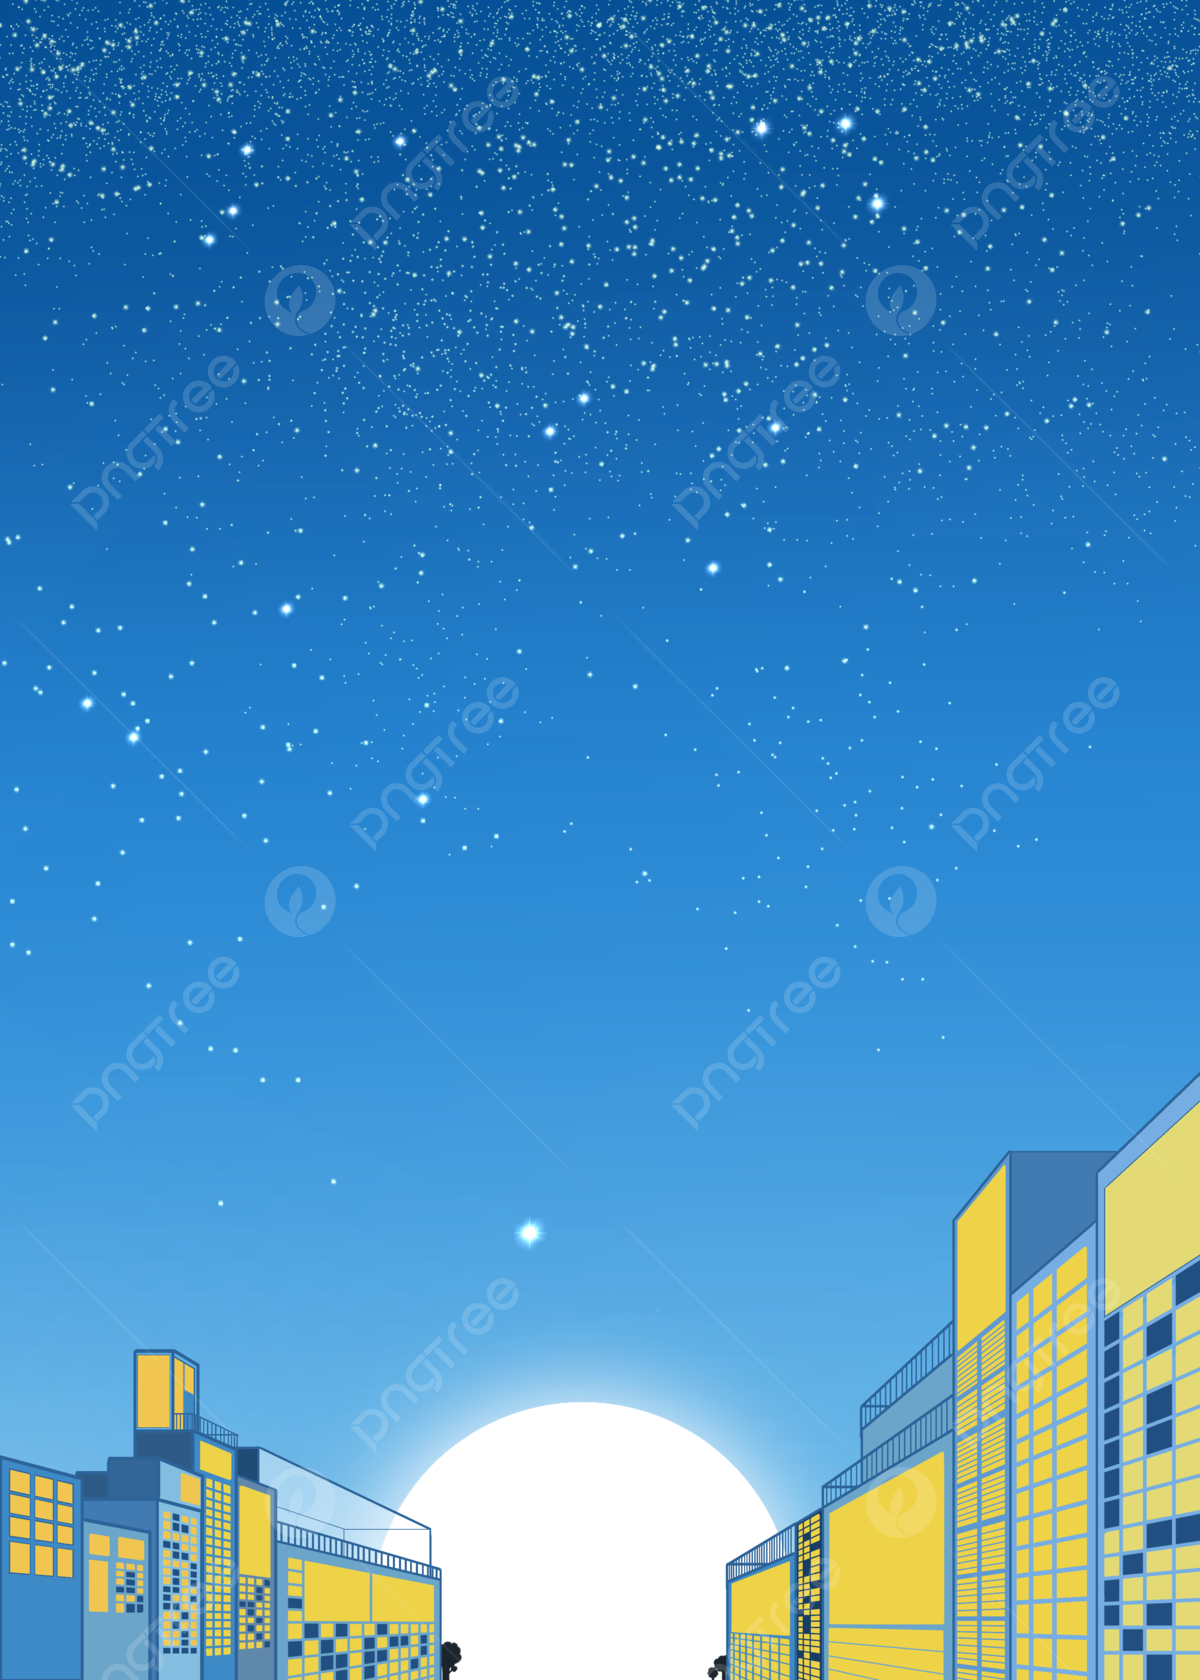 Night city scape background fullmoon night city illustration blue wallpaper background image for free download